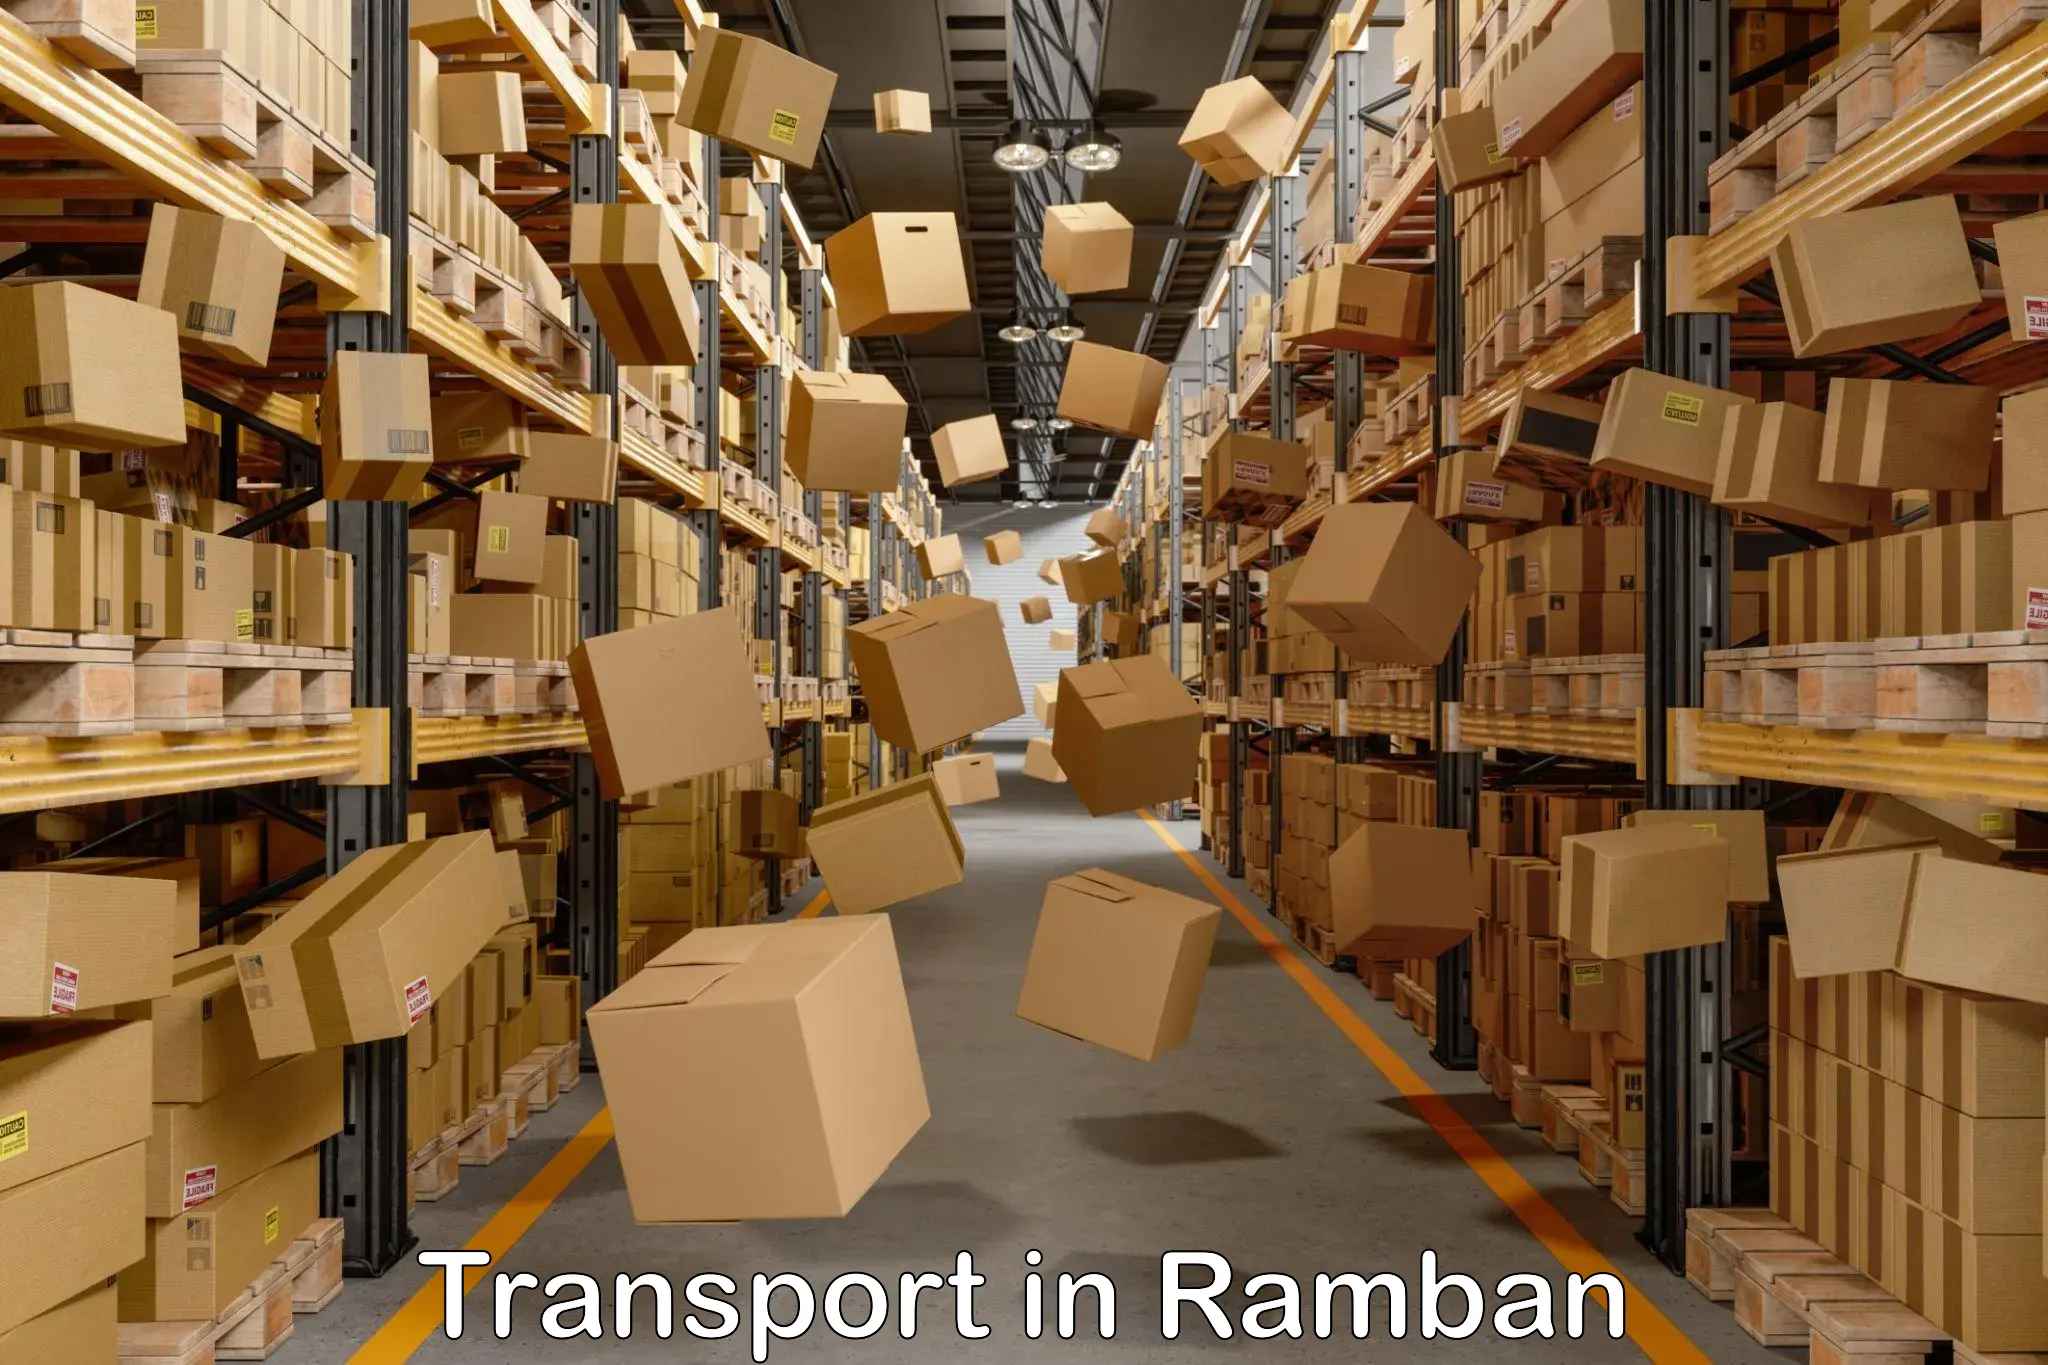 Road transport services in Ramban